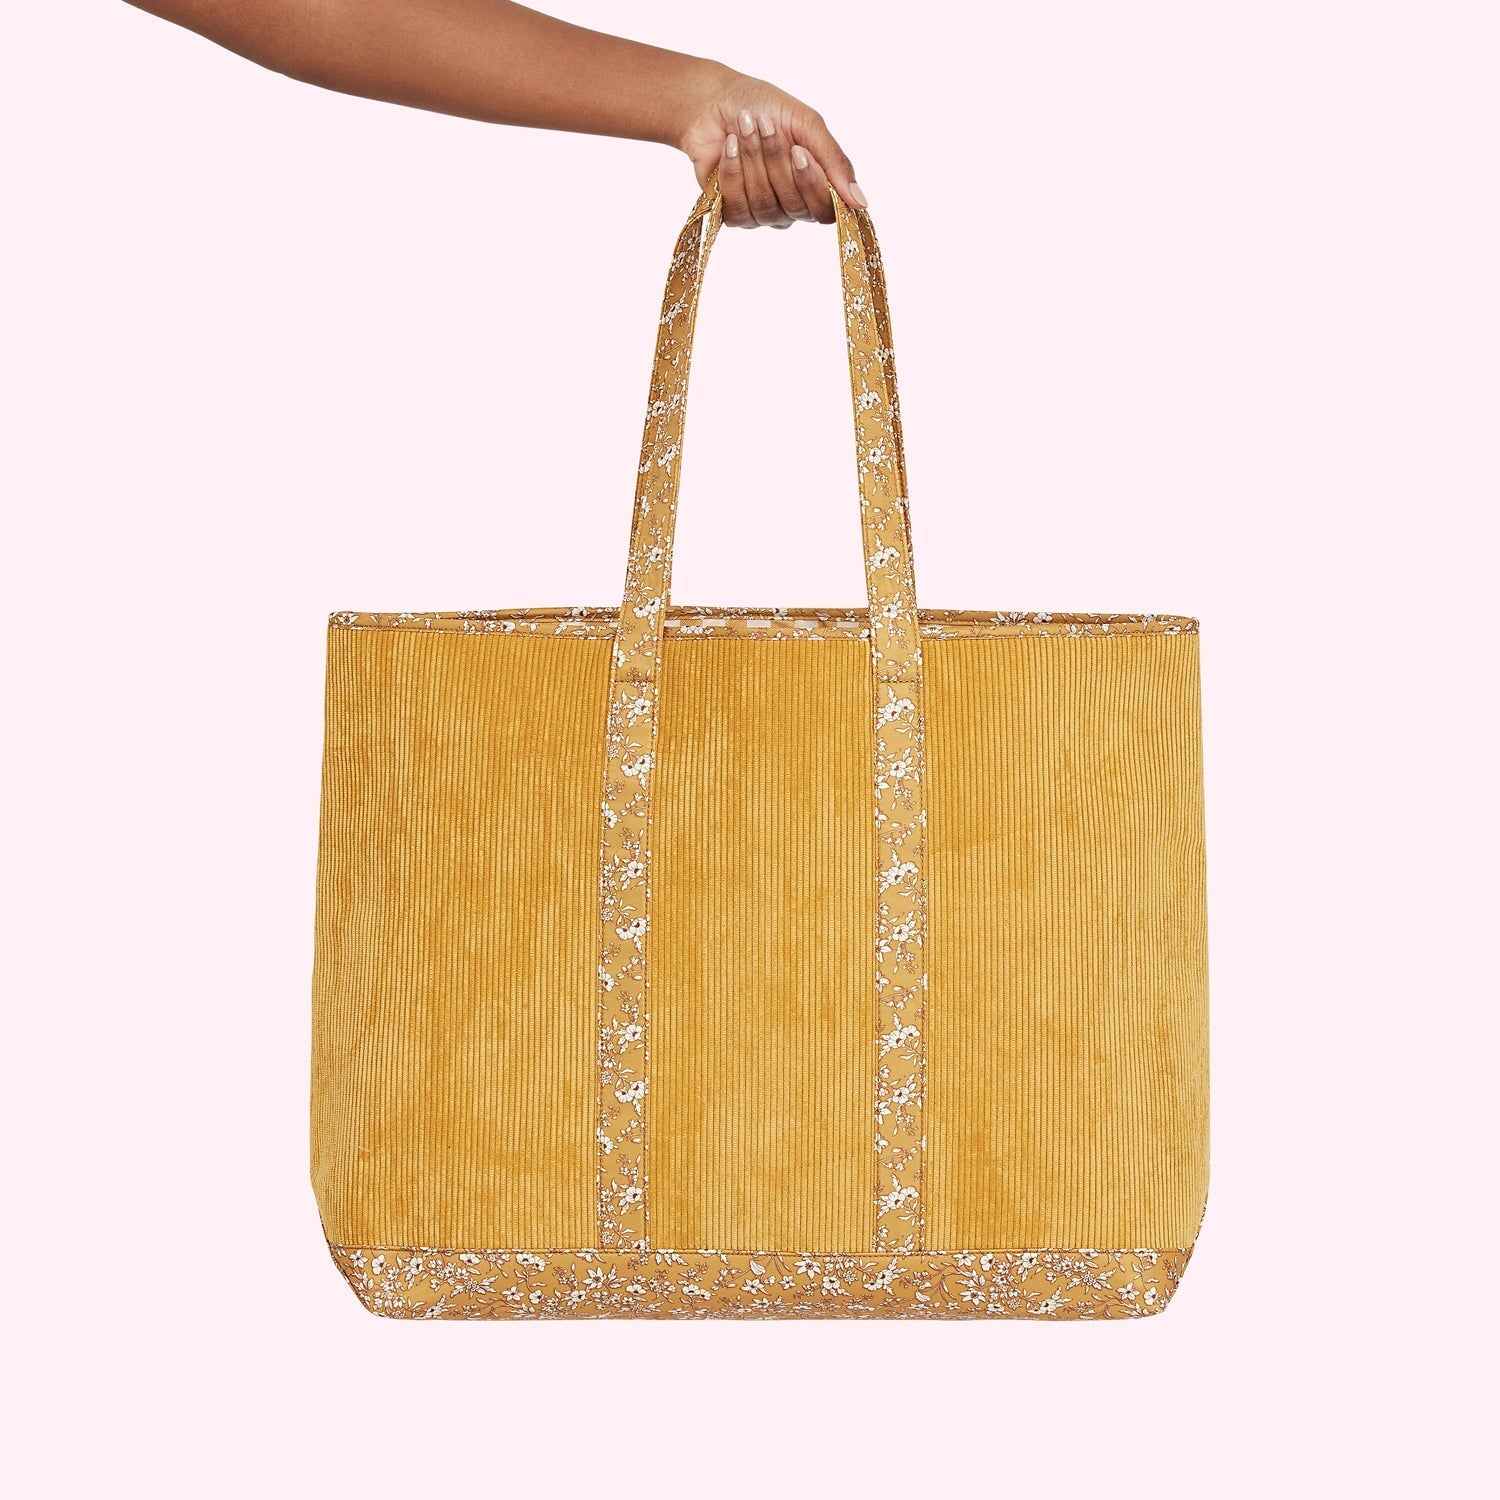 The Cozy Cottage Large Corduroy Tote